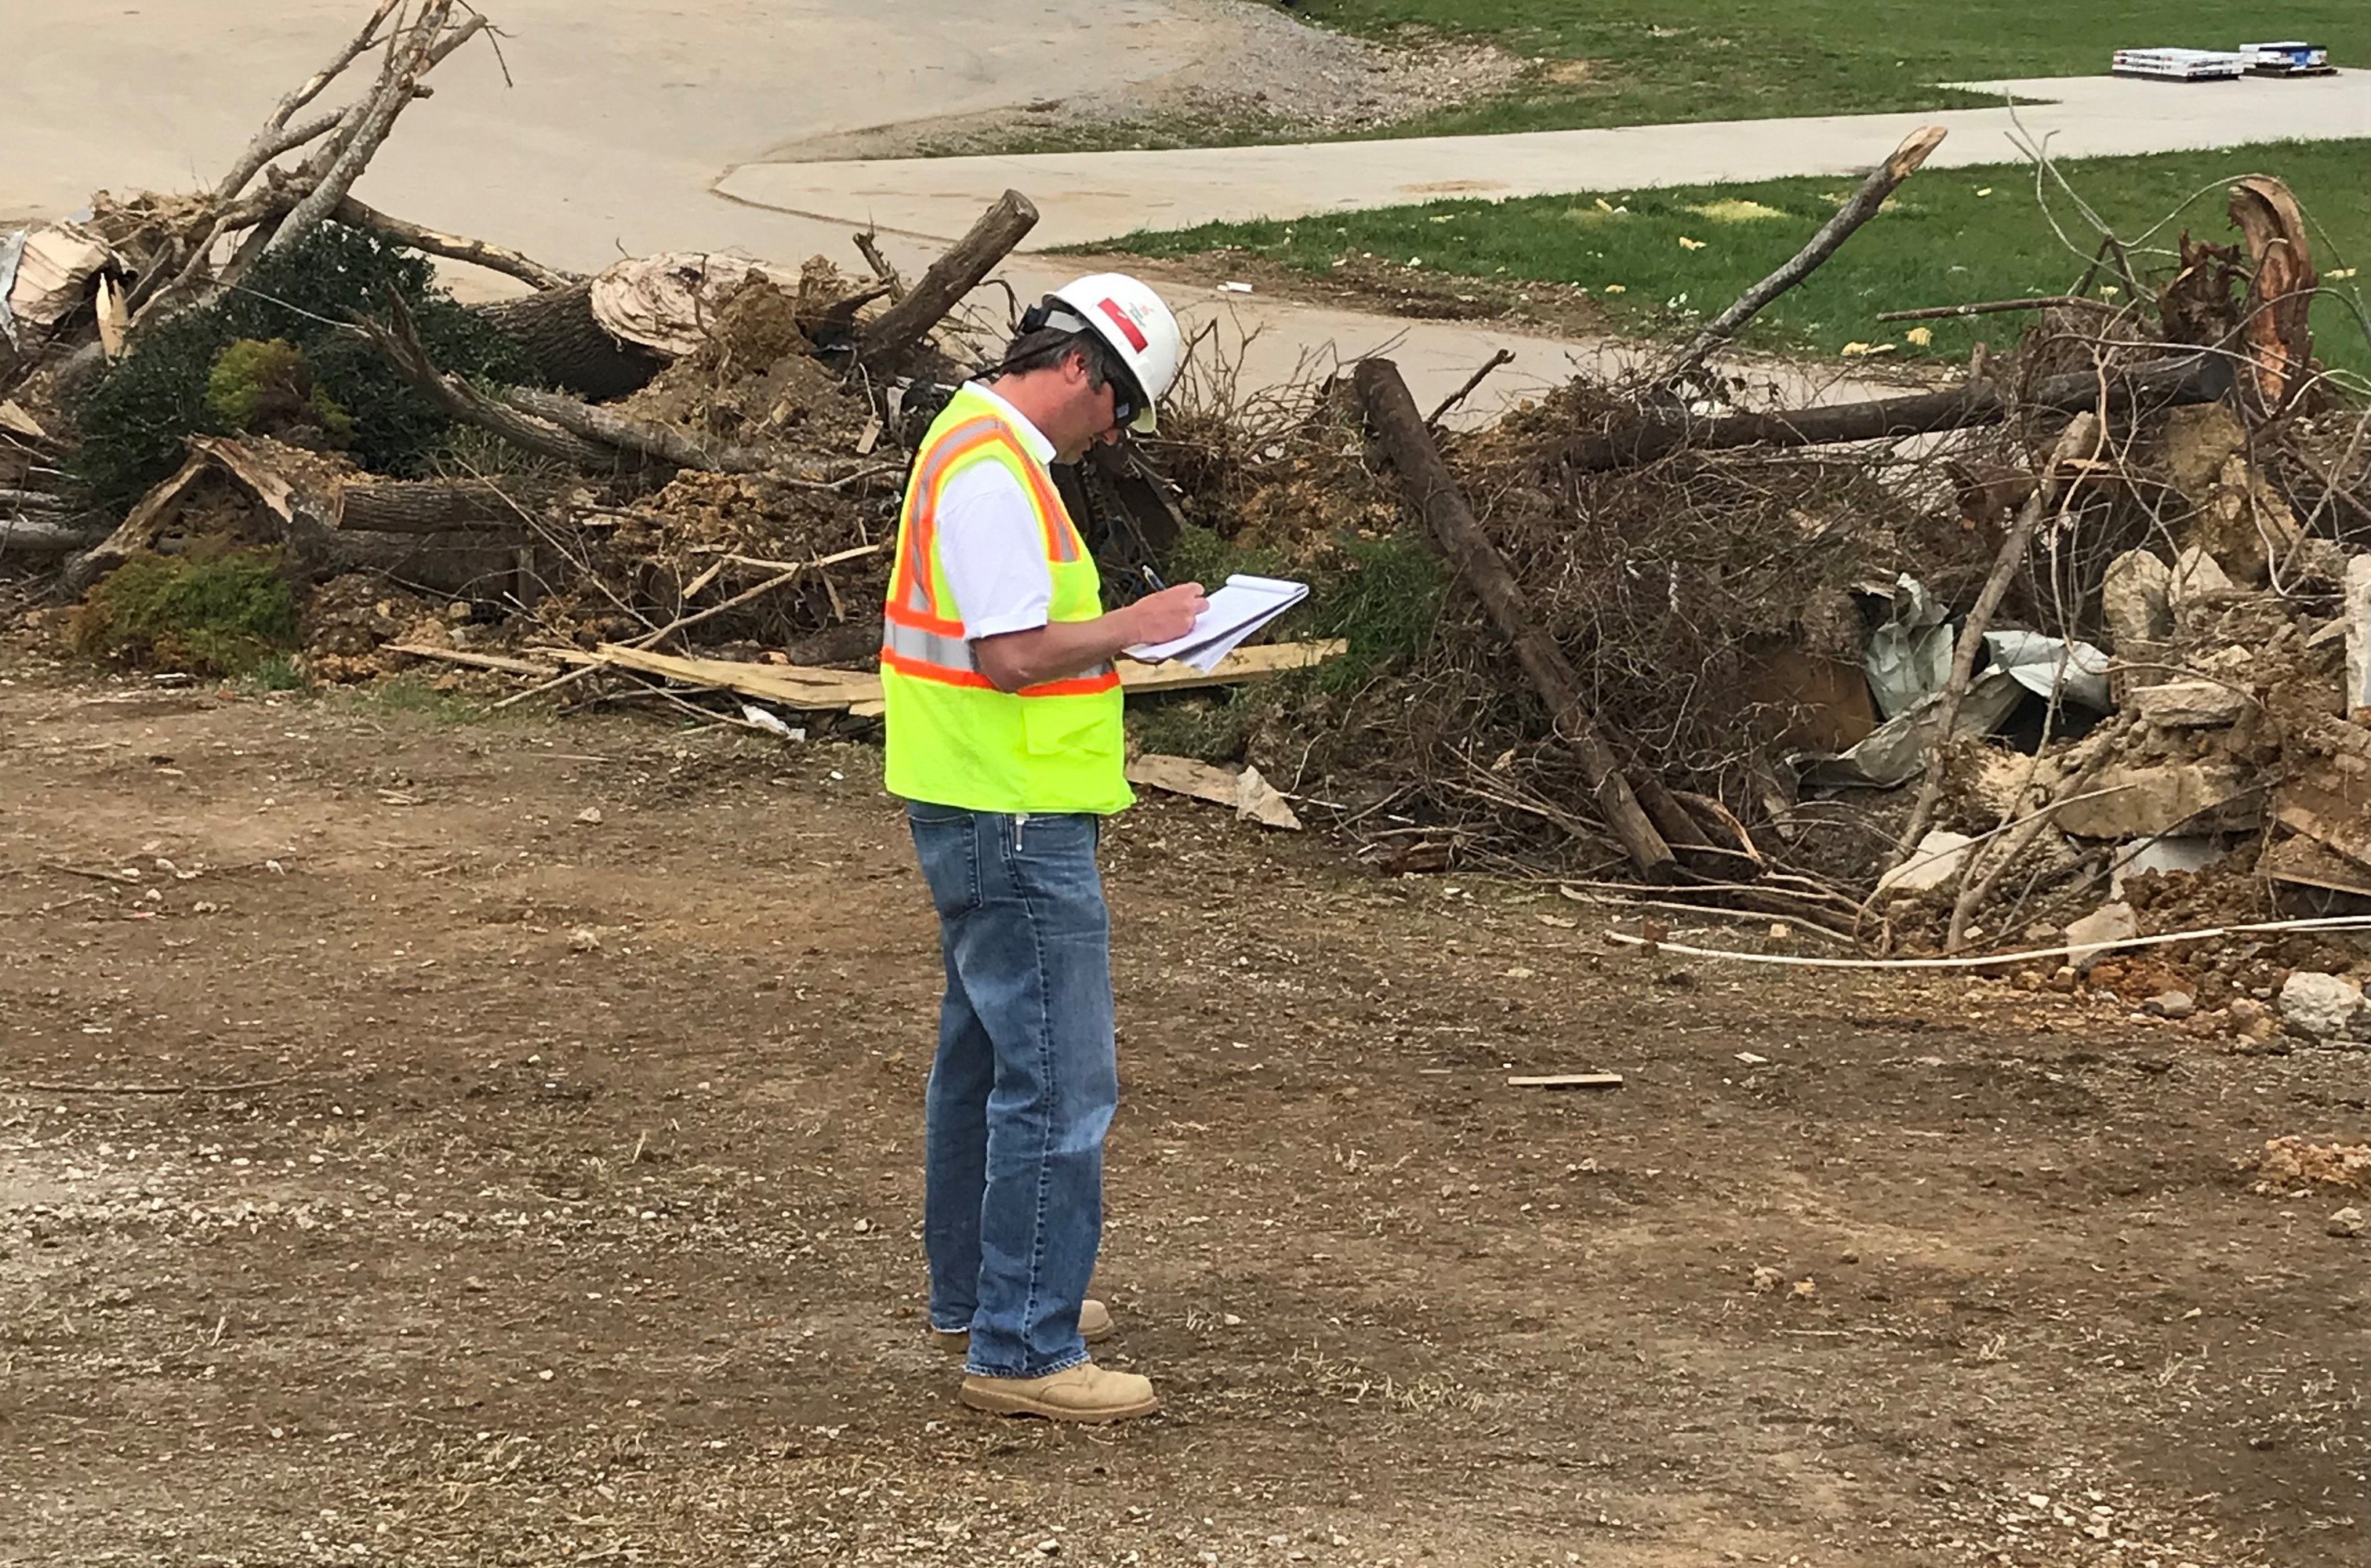 A disaster relief worker taking nots next to debris from a hurricane.